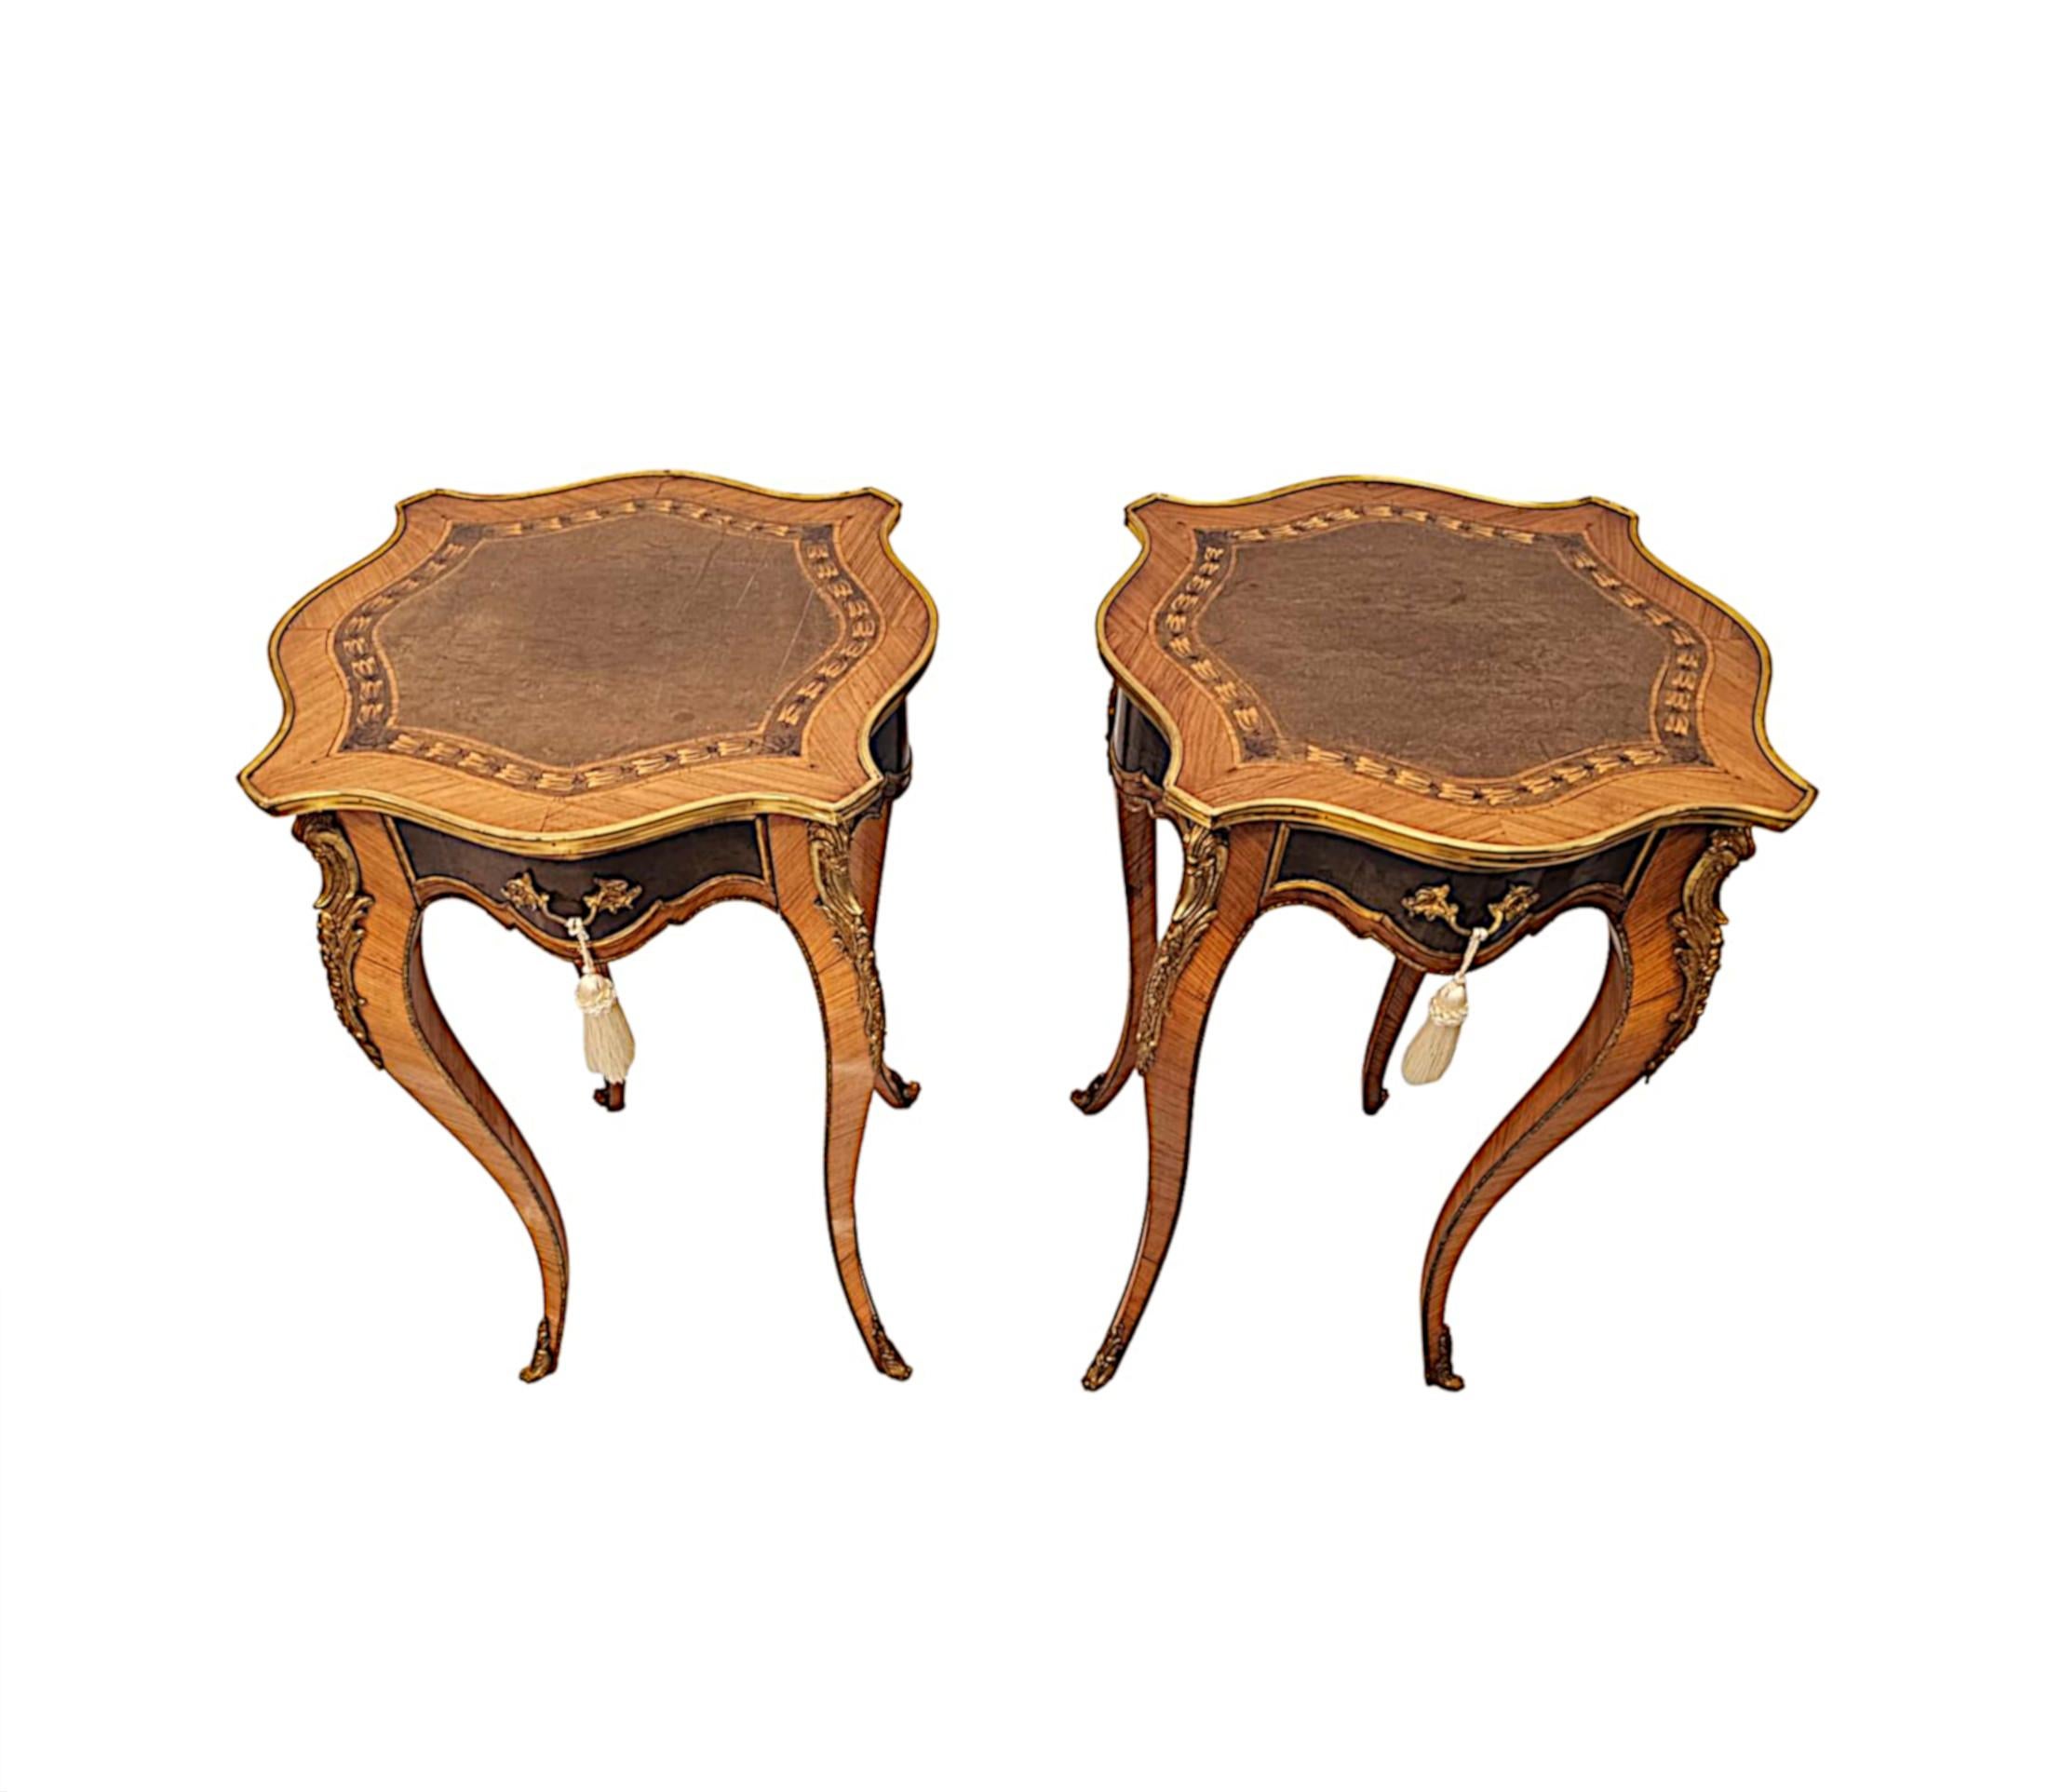 A Stunning Pair of 20th Century Ormolu Mounted Inlaid Side Tables In Good Condition For Sale In Dublin, IE